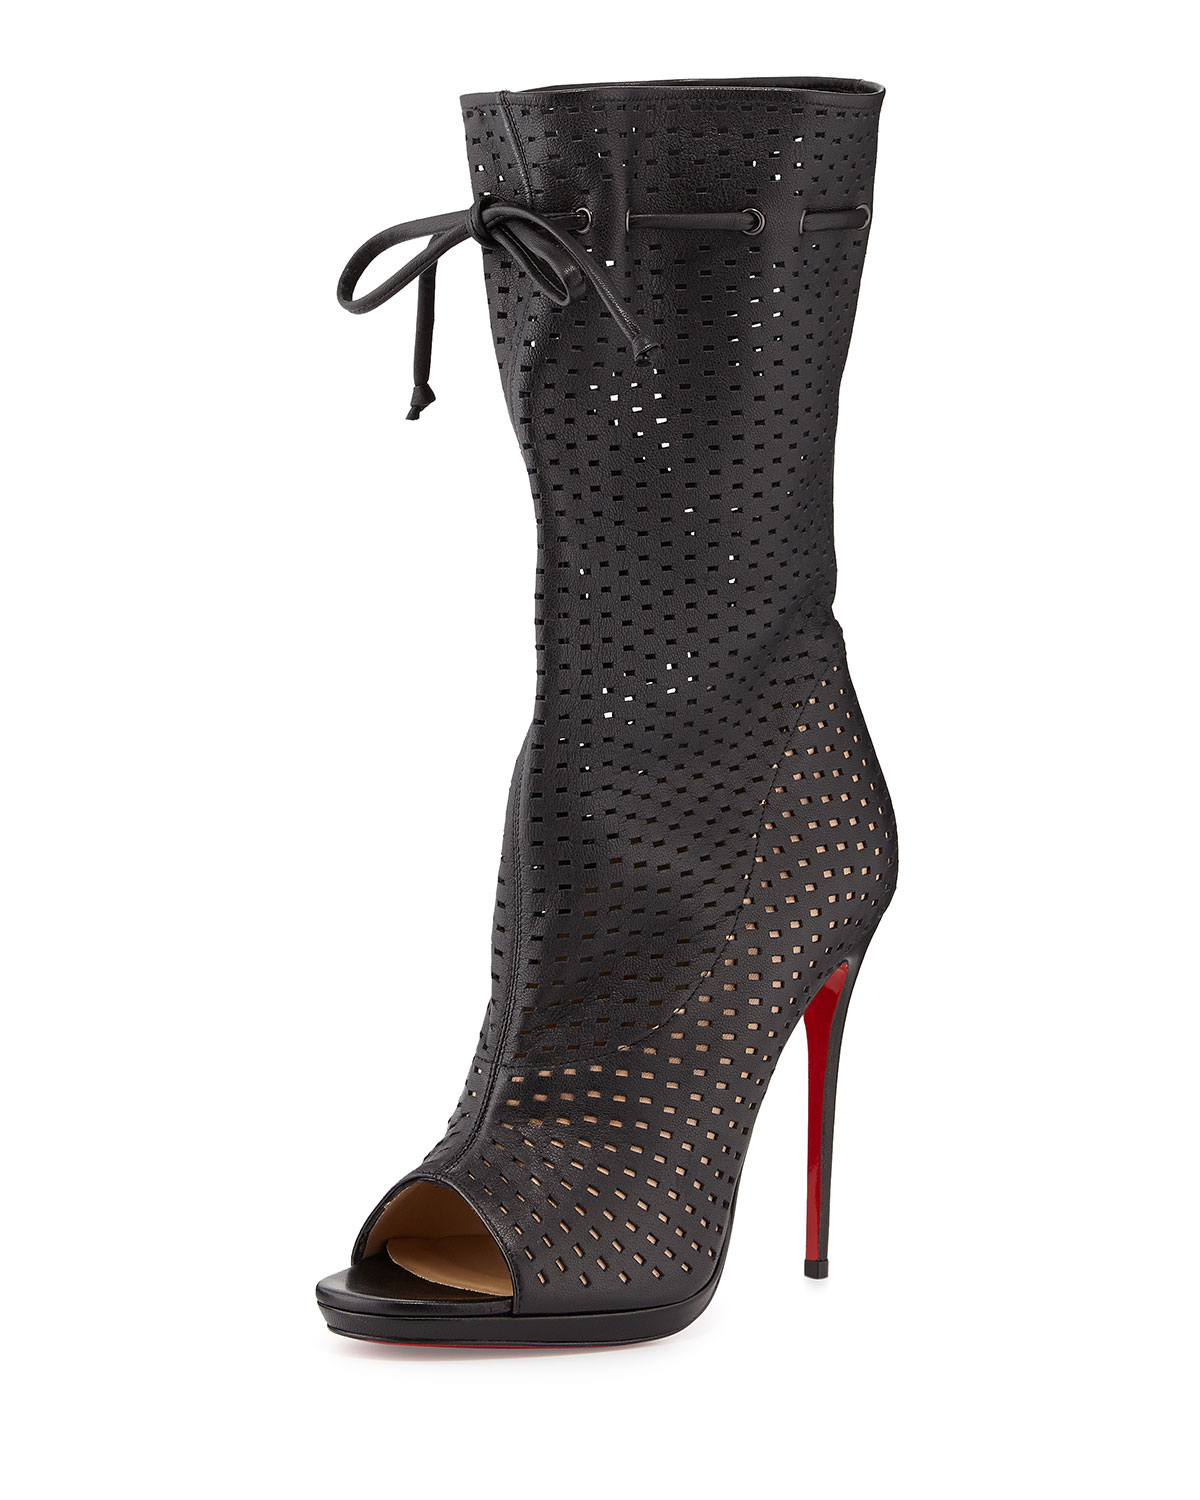 Lyst - Christian Louboutin Jennifer Perforated Red Sole Boot in Black